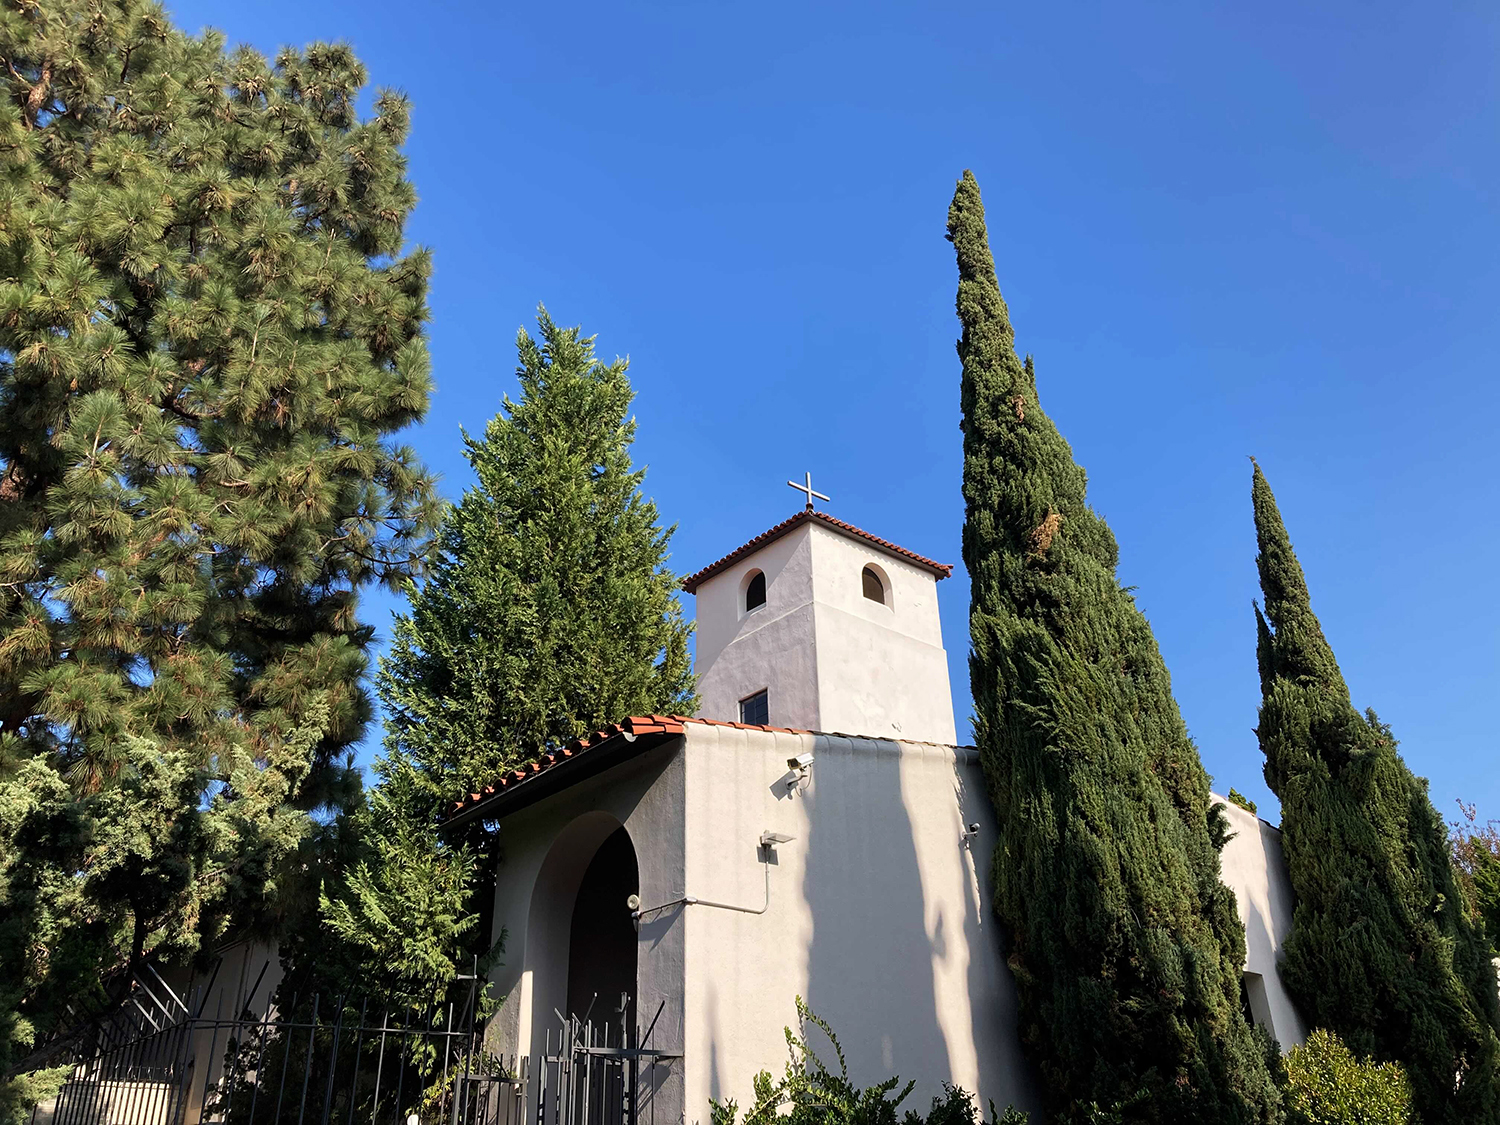 Founded in 1924 by a New Jersey nun, the Monastery of the Angels is home to a community of cloistered Dominican nuns who devote their lives to Scripture and prayer. RNS photo by Alejandra Molina